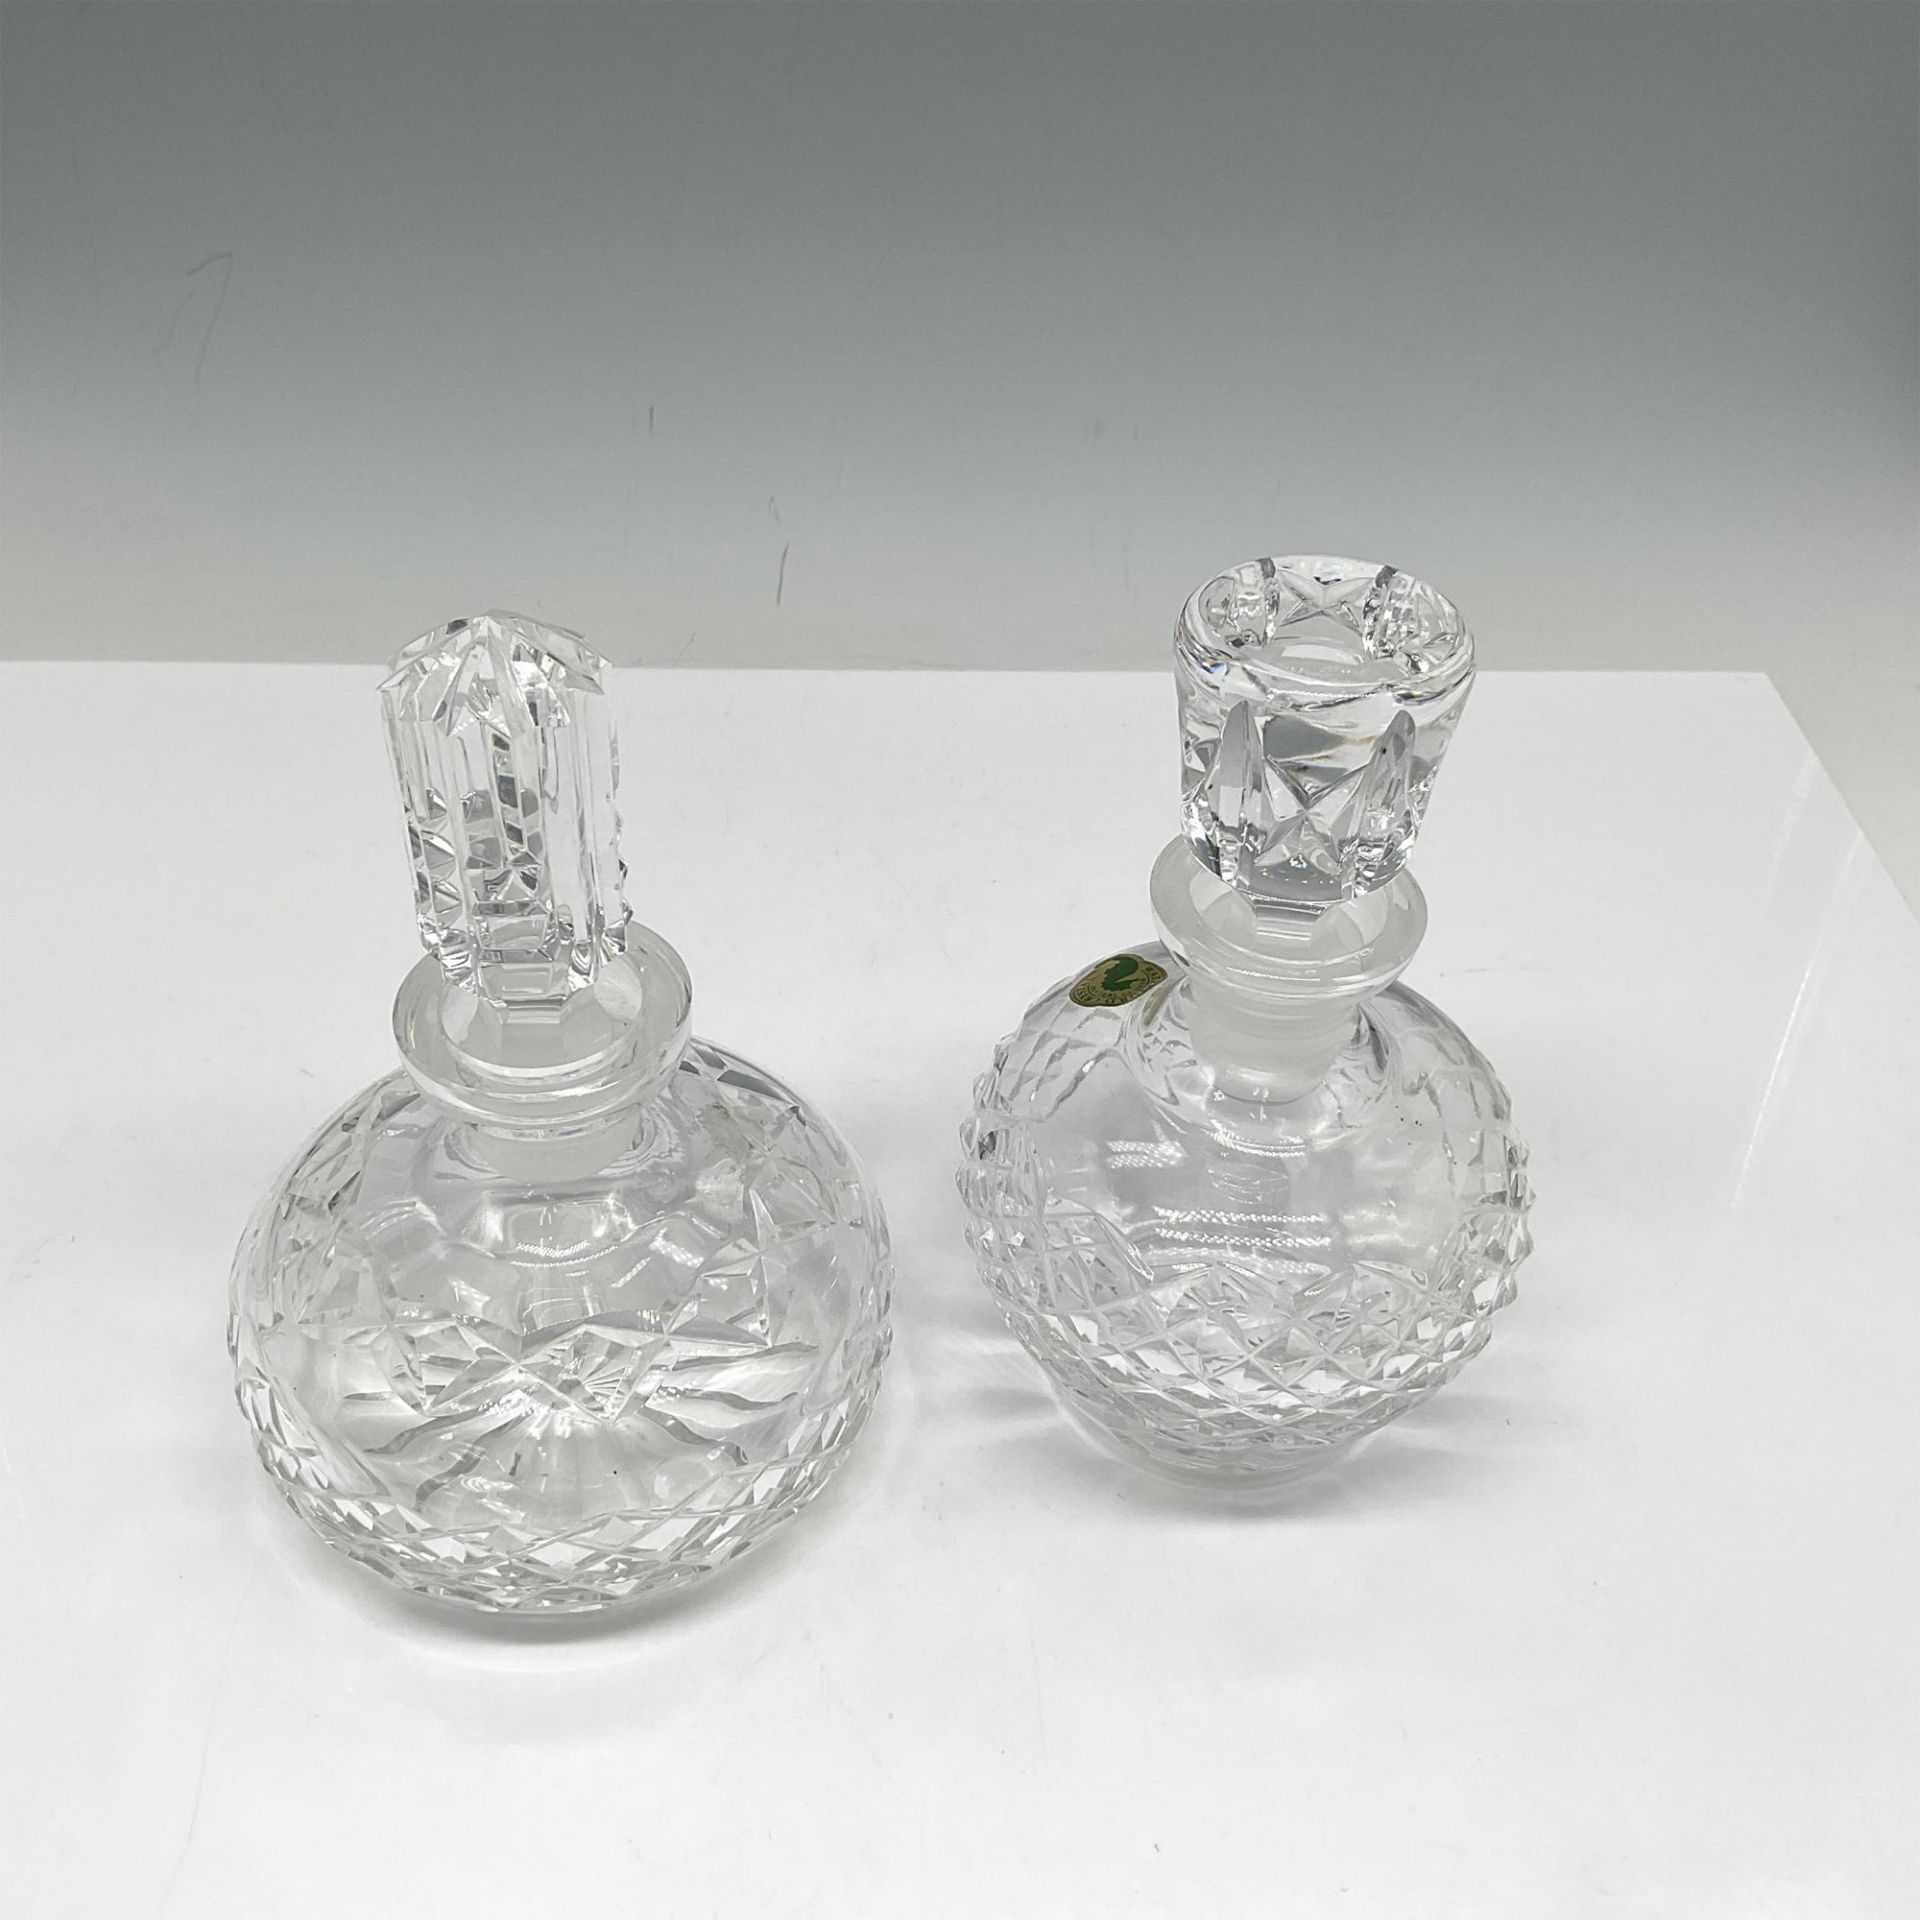 2pc Waterford Crystal Scent Bottles - Image 2 of 3